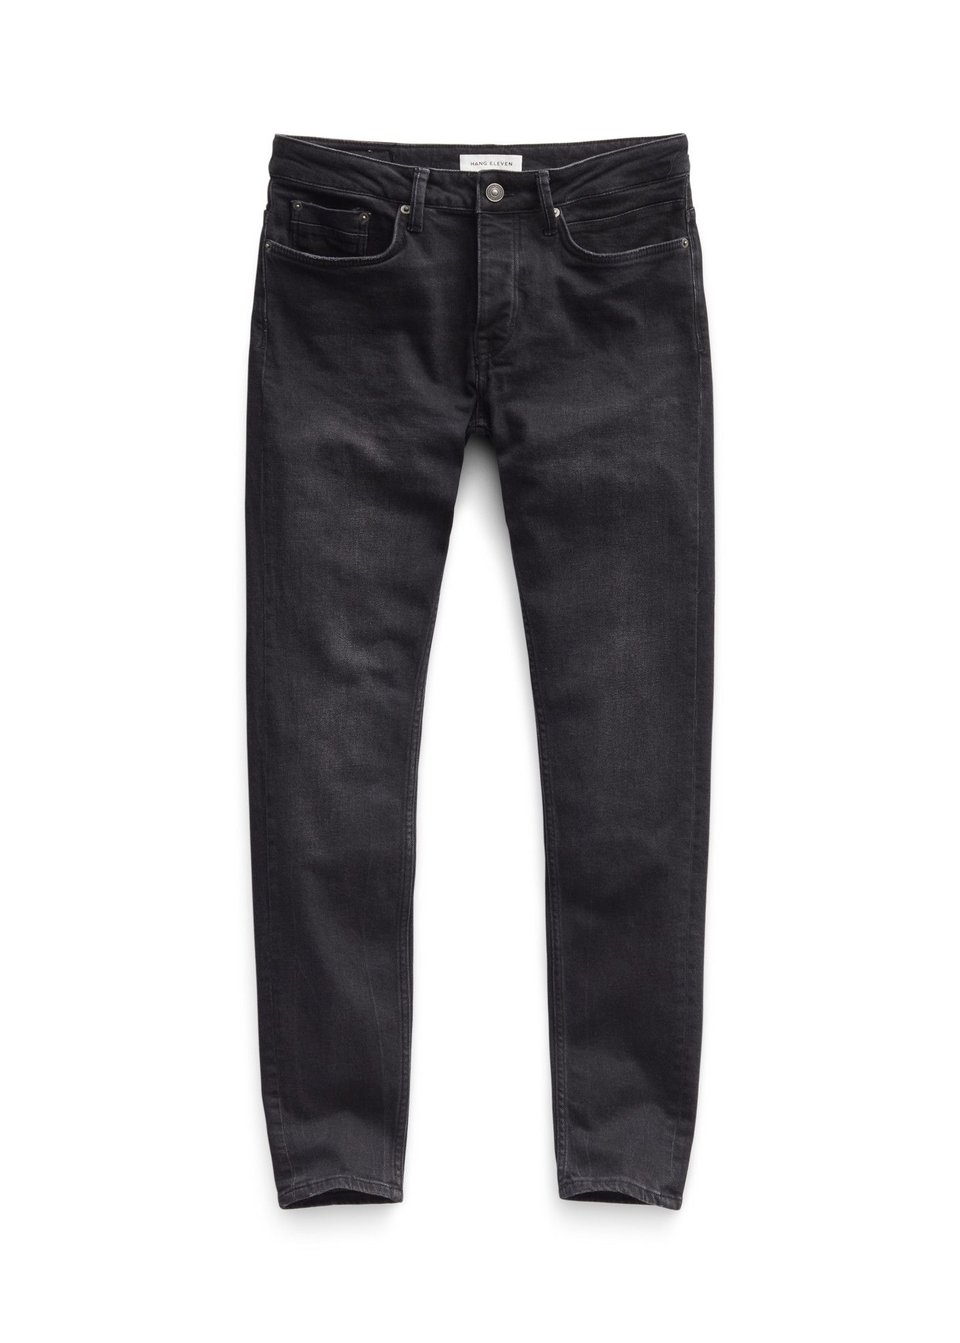 Beach Tapered Jeans - Black